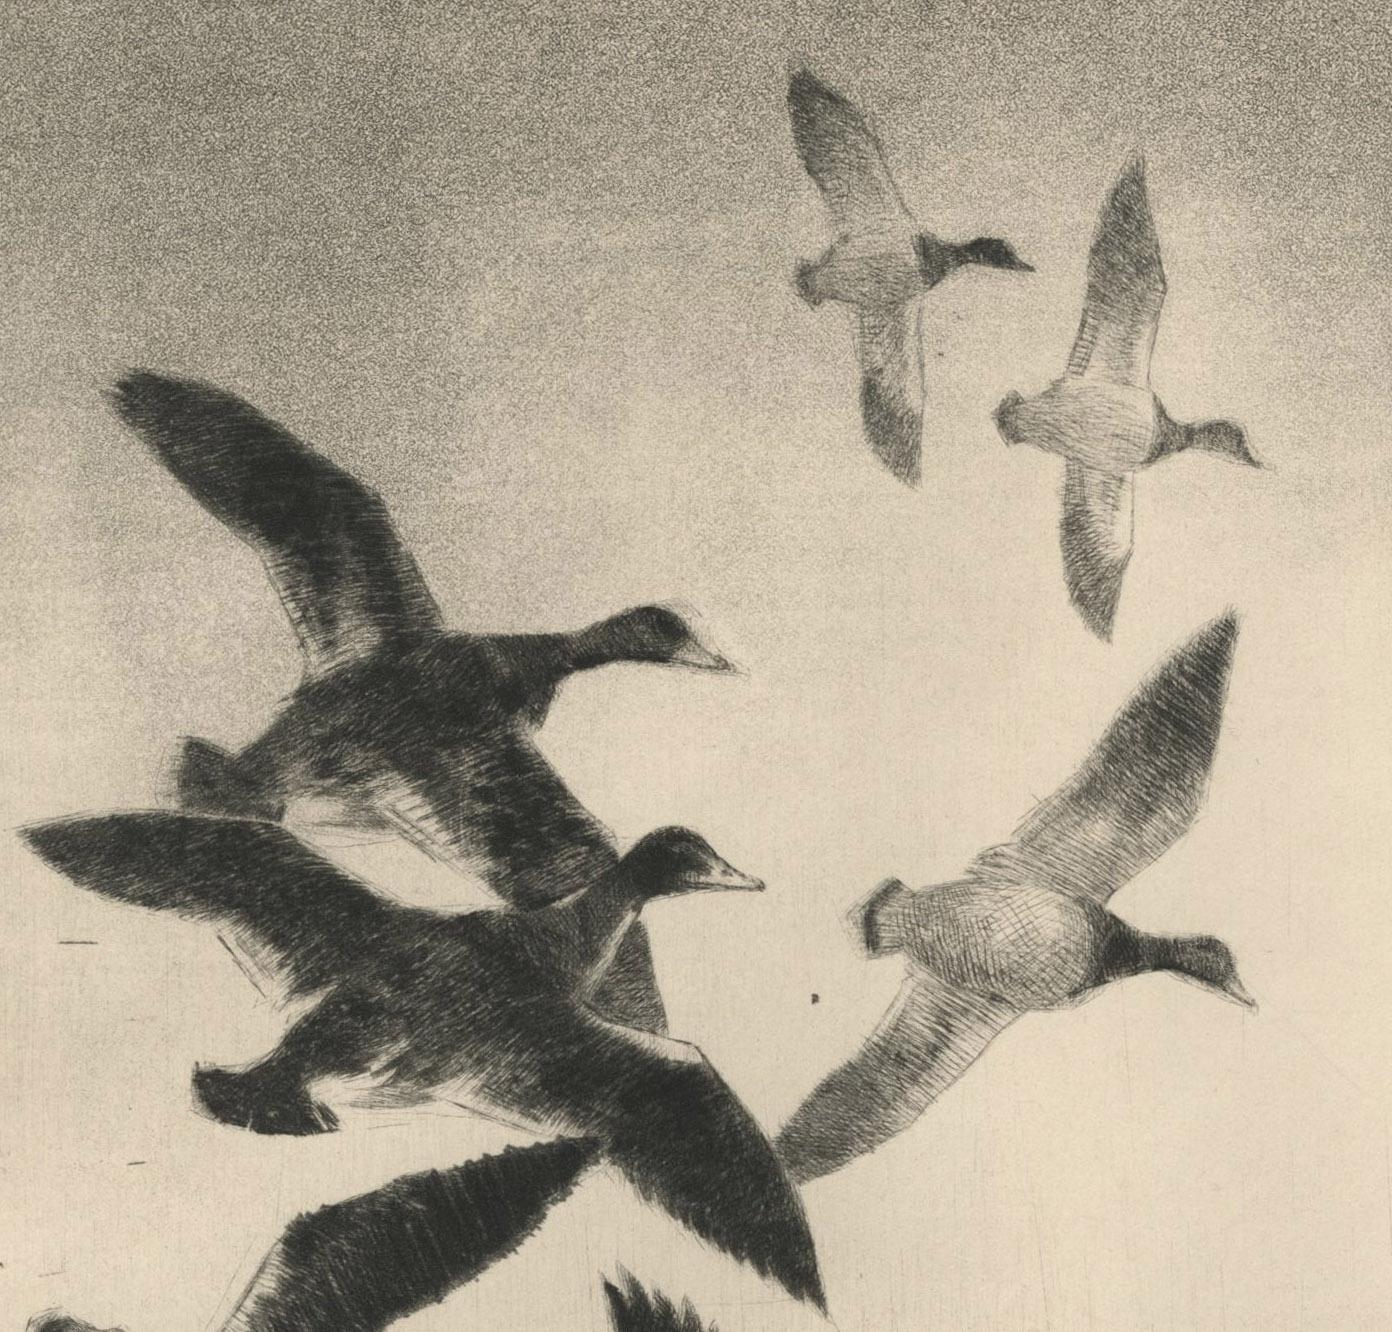 untitled (Duck taking to flight, flushed by a dog)
Drypoint & Aquatint, c. 1940
signed lower right
Created while the artist was a commercial artist working in Minneapolis, after his tenure of being an instructor at the Minneapolis Institute of Art